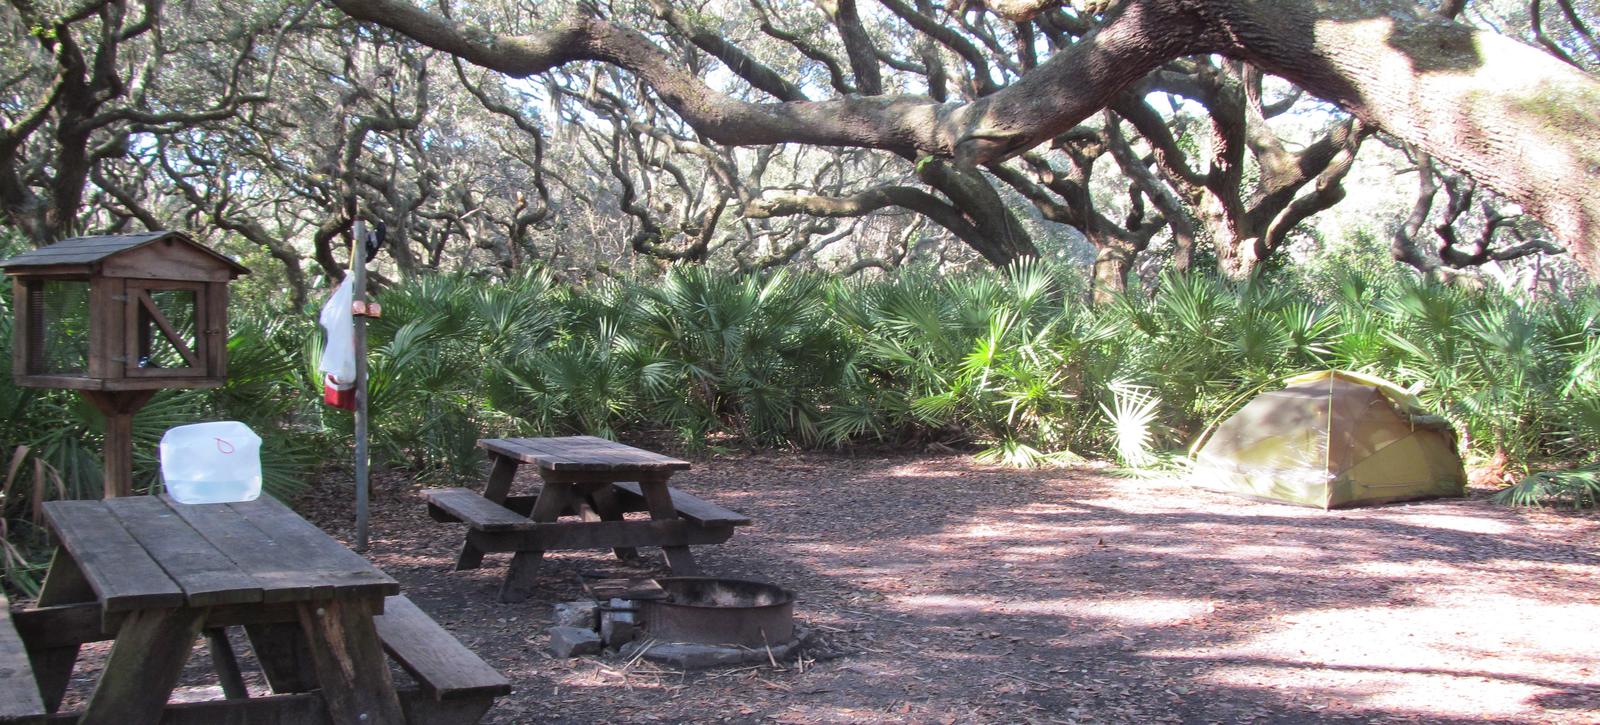 campsite with picnic table, food cage, and fire ring under live oak treesSea Camp site 11